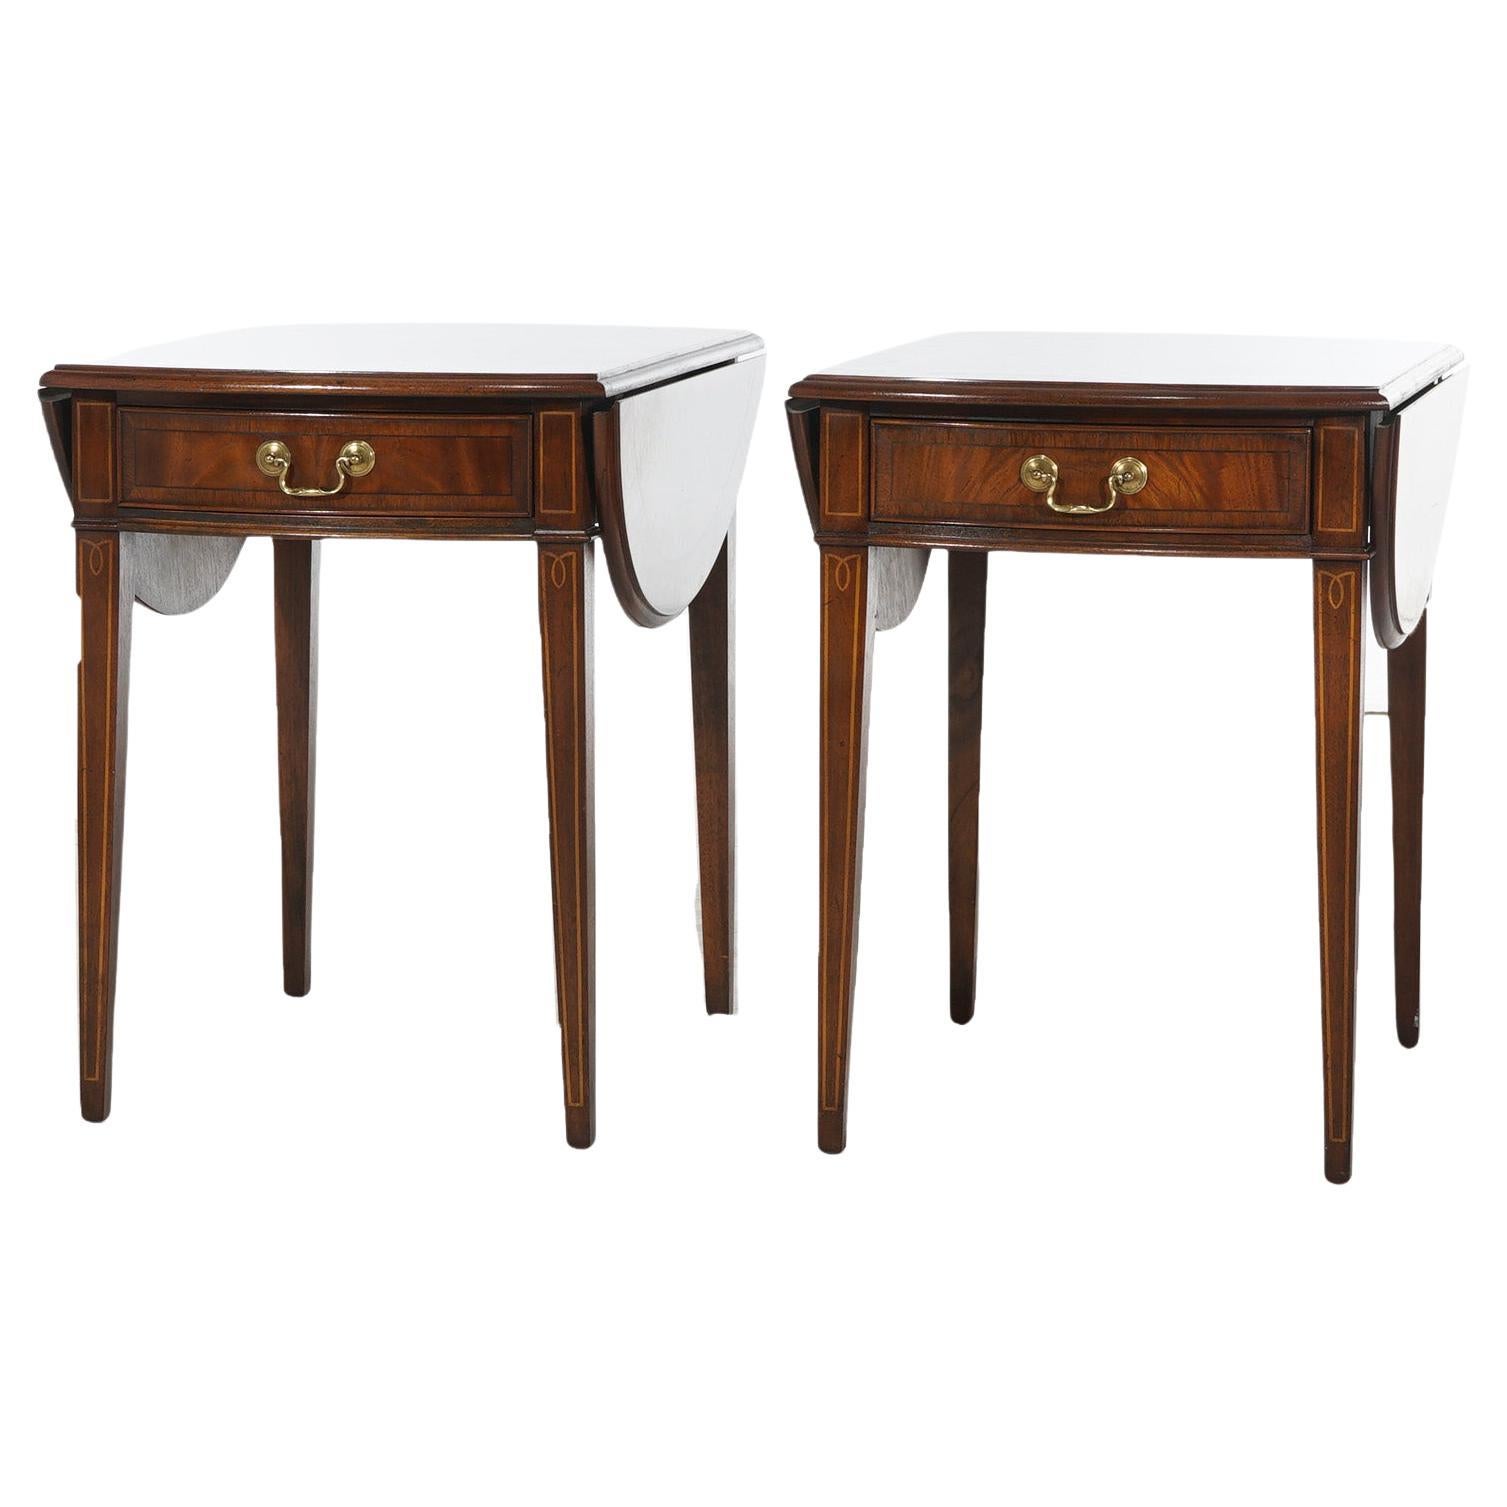 Pair Hekman Pembroke Style Flame Mahogany Side Tables 20thC For Sale